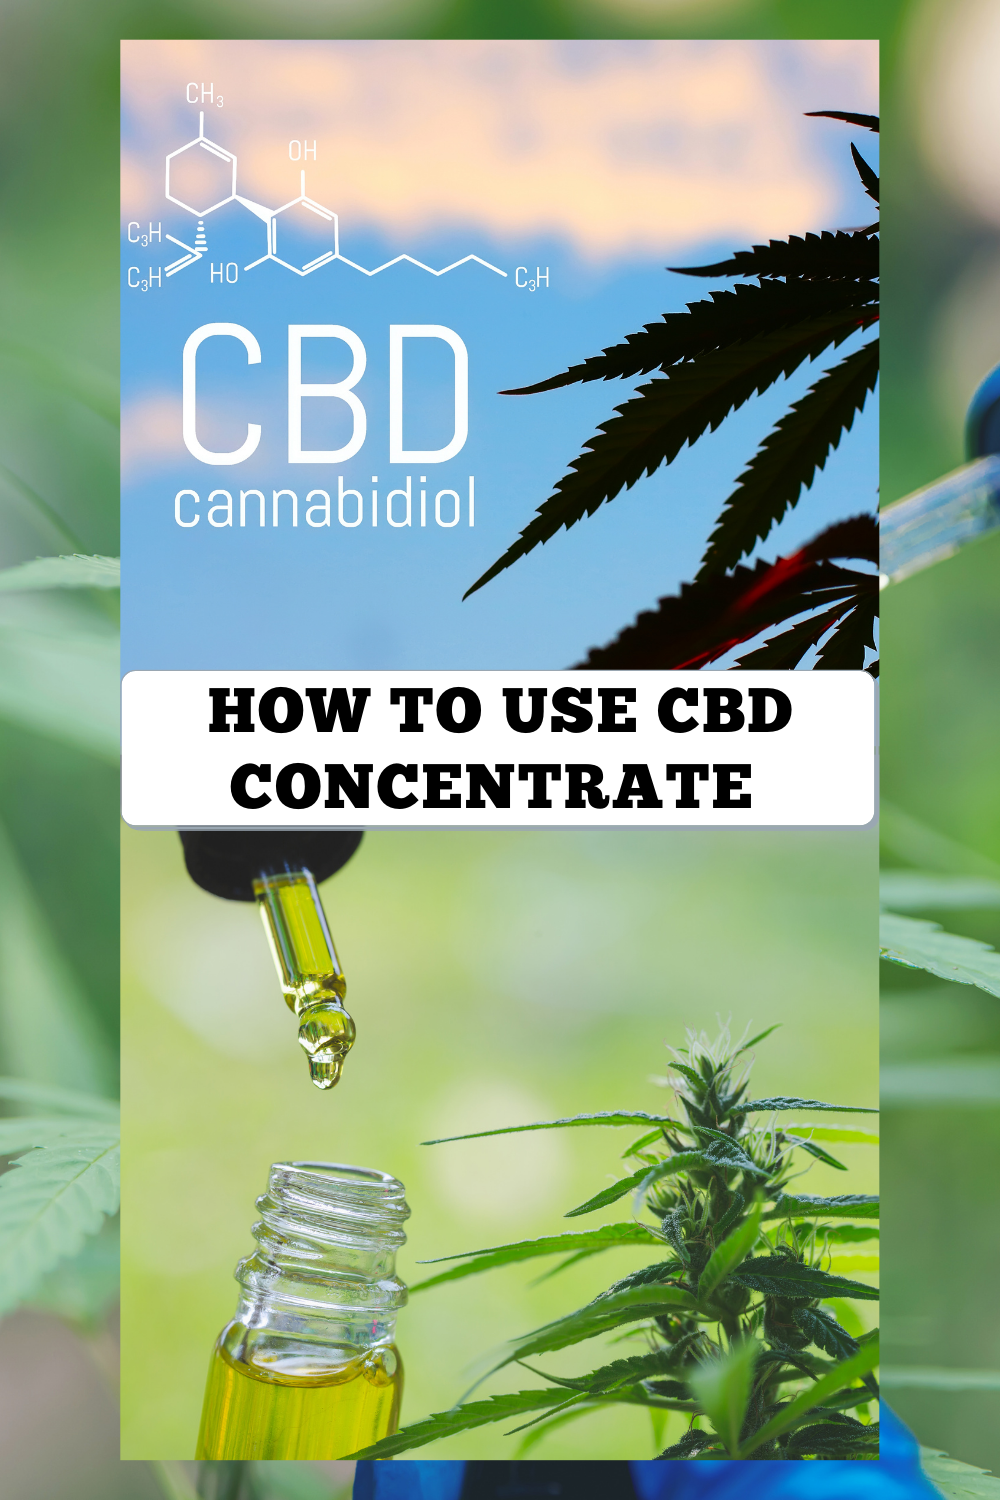 What is CBD Concentrate and How to Use it?